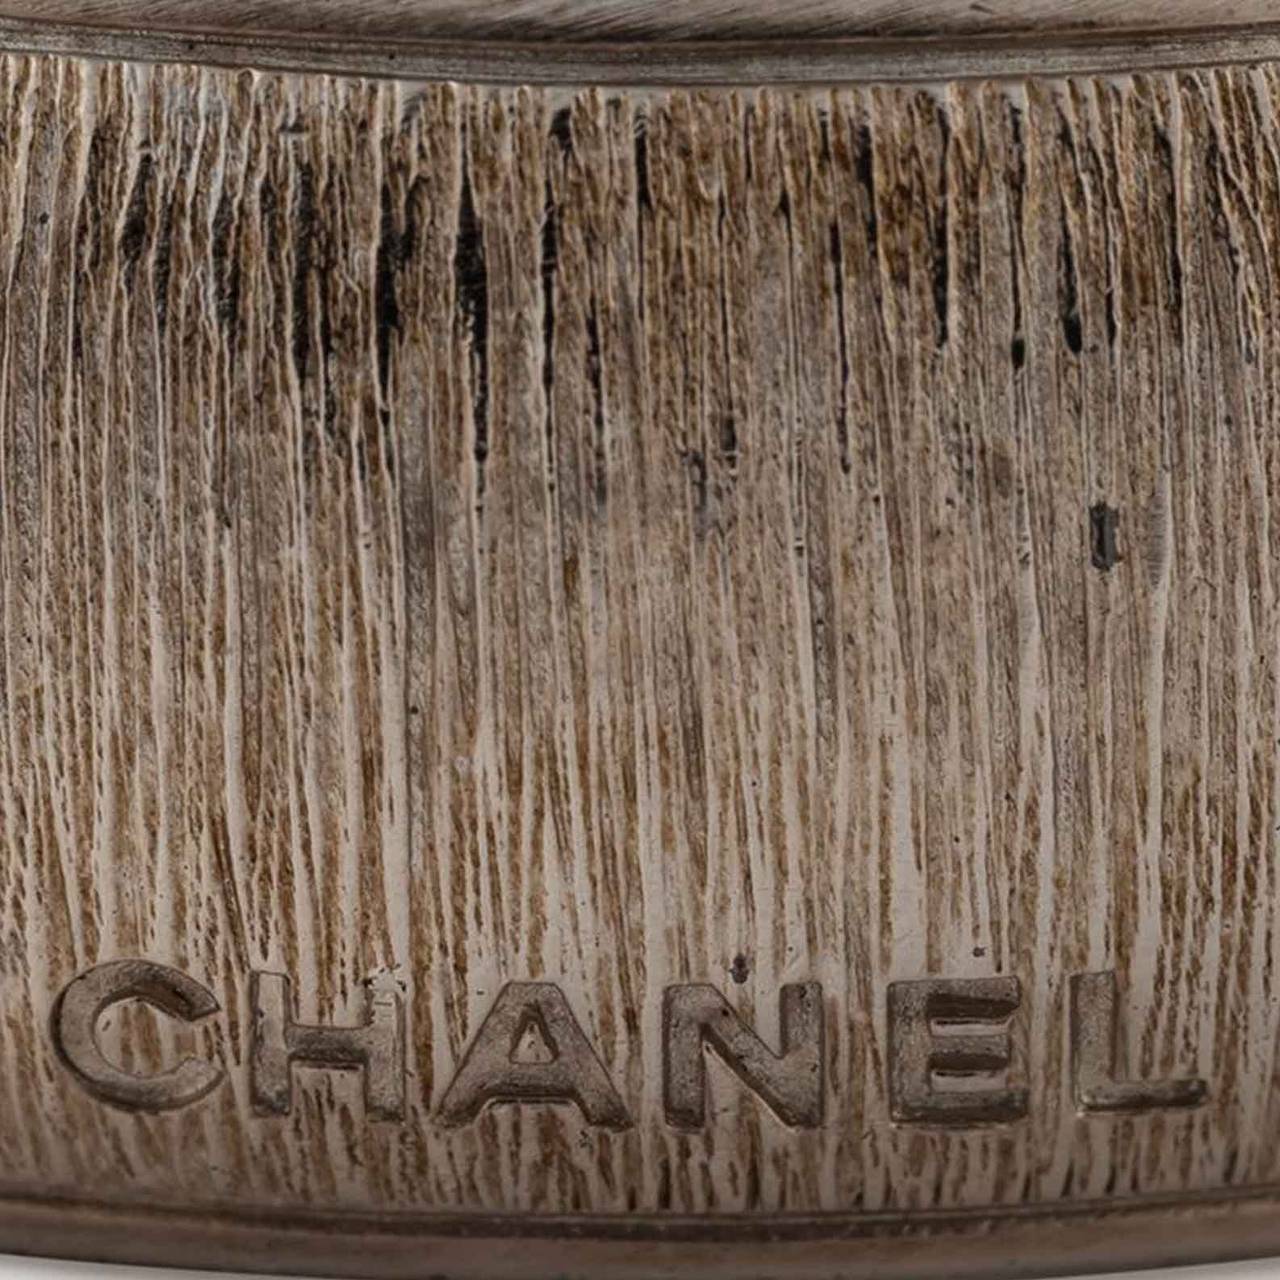 This textured Silver-tone bangle from Chanel features a front engraved logo stamp and an internal logo plaque.

Measurement: Width: 1.5 cm, Circumference: 20.3 cm

Material: Metal

Colour: Silver-tone